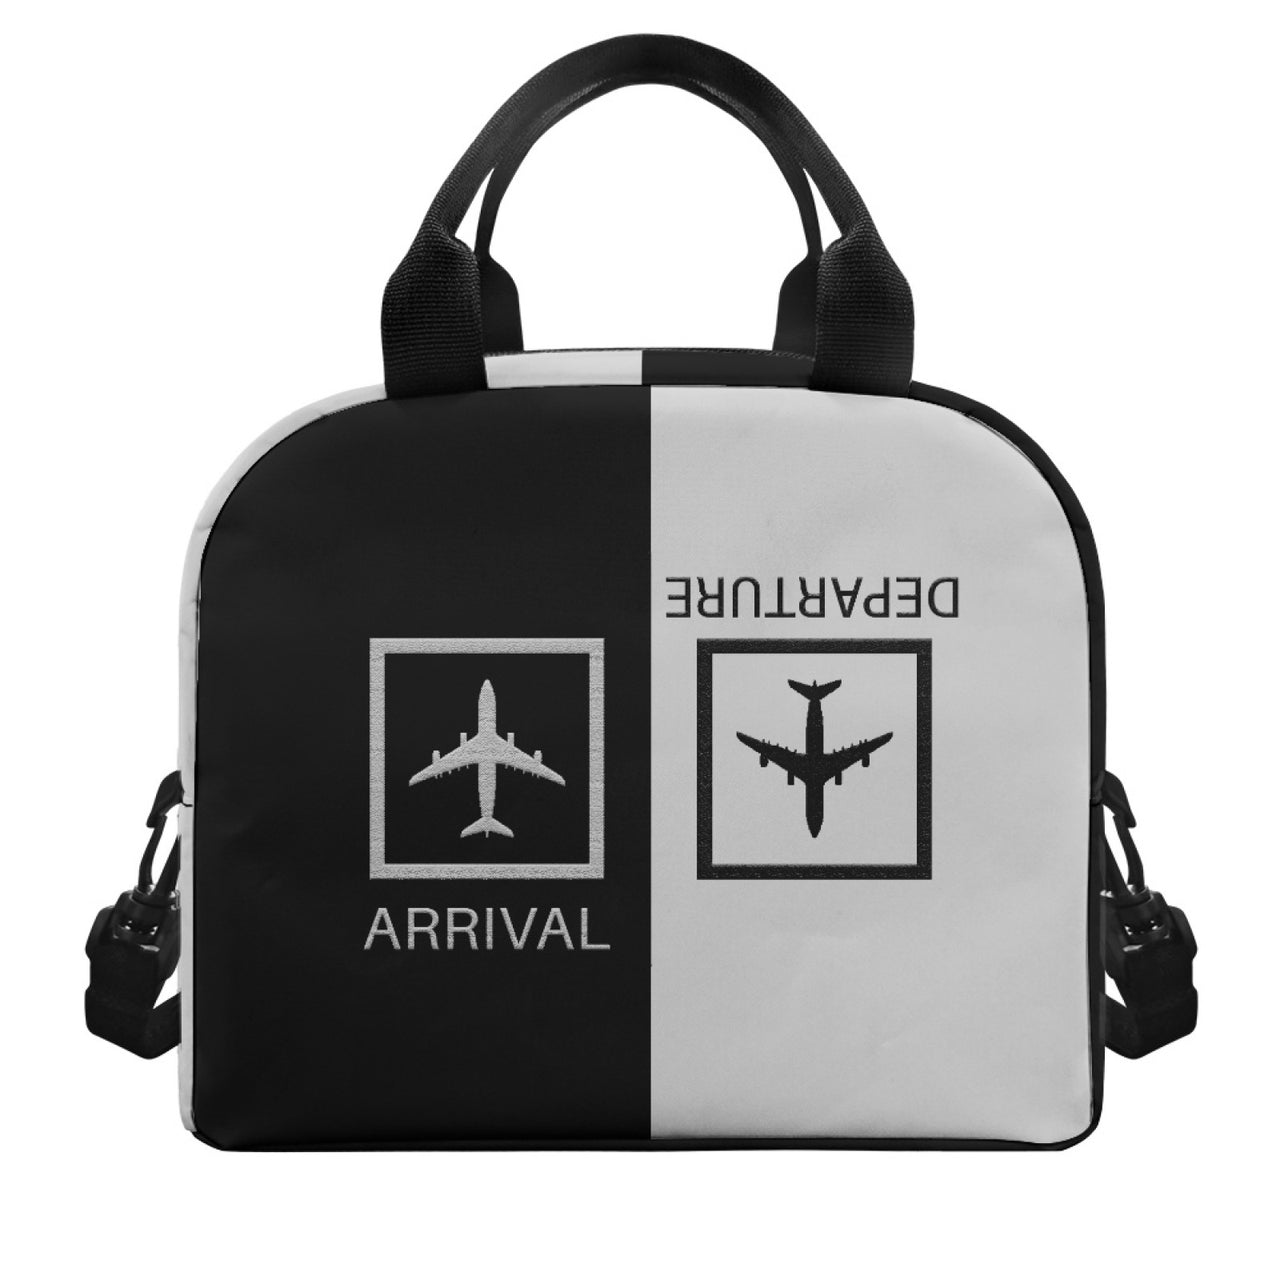 Arrival & Departures 2 Designed Lunch Bags